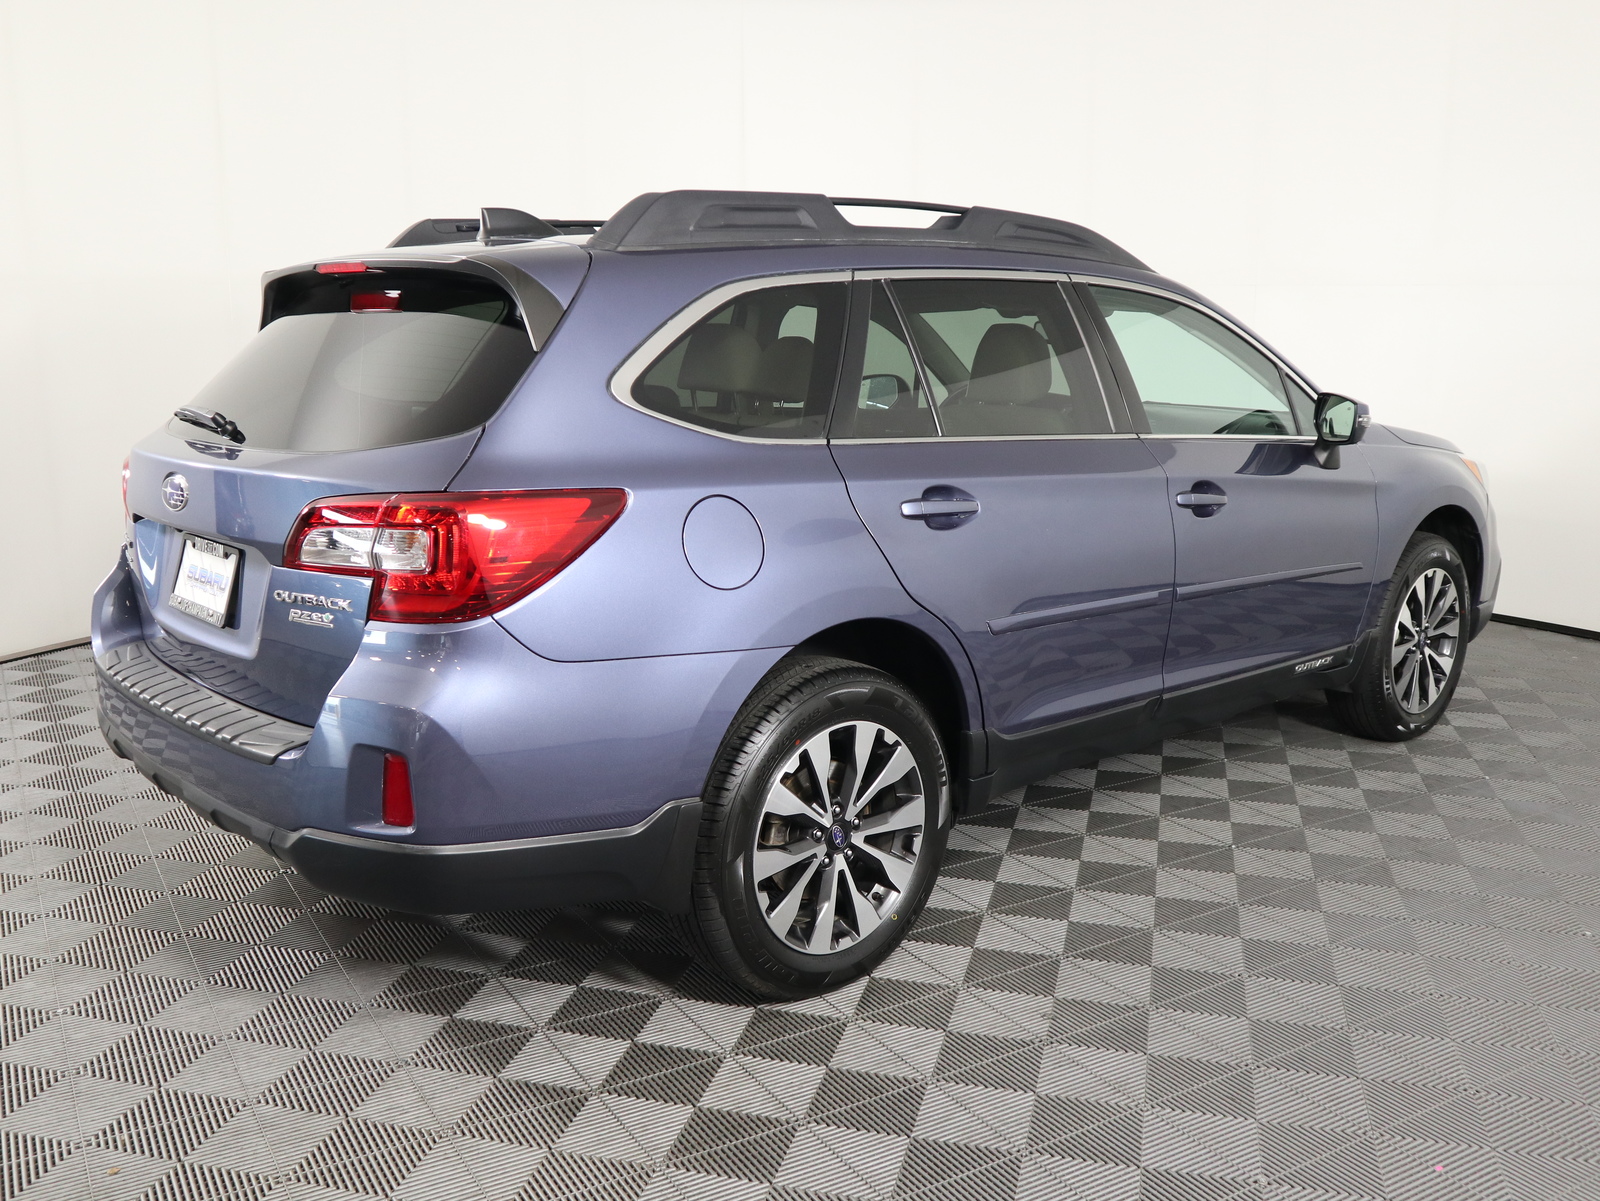 PreOwned 2016 Subaru Outback 4dr Wgn 2.5i Limited PZEV